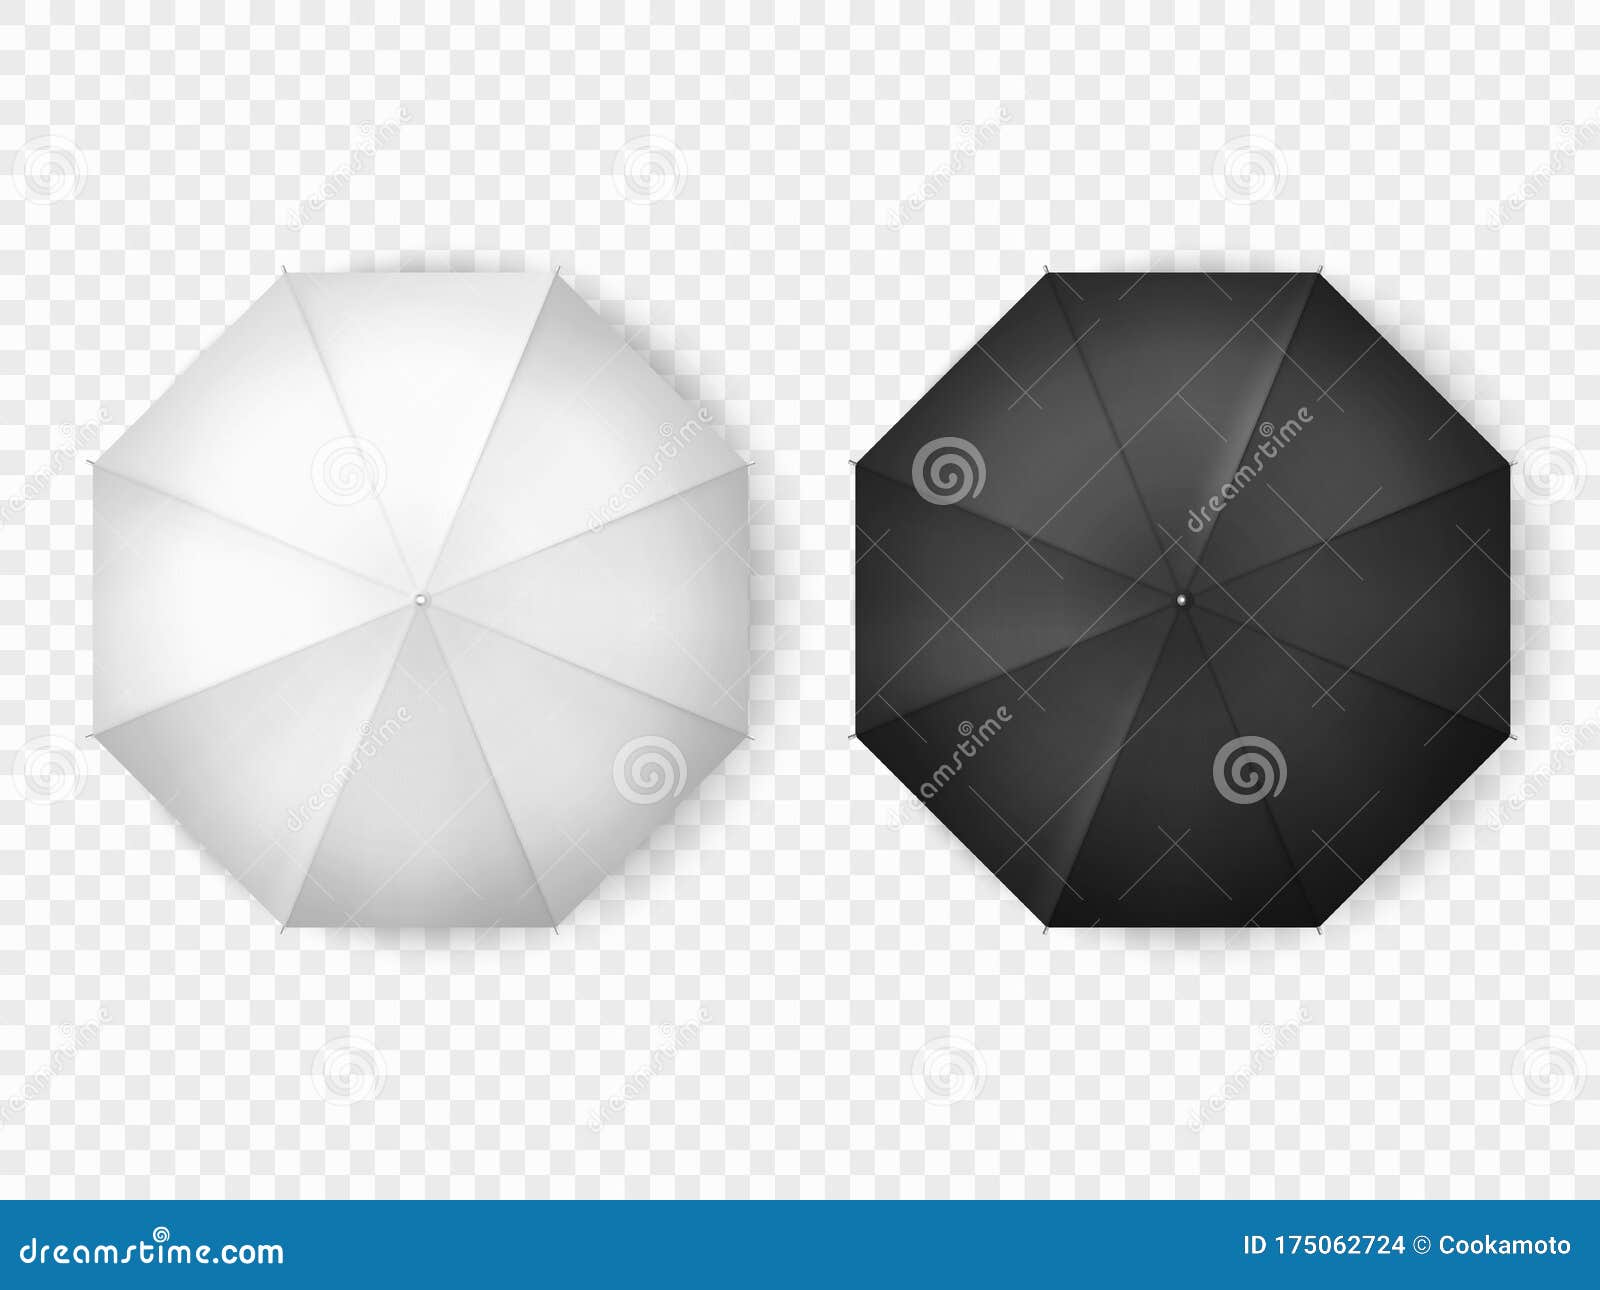 Download White And Black Open Umbrellas, Top View Mockups Stock ...